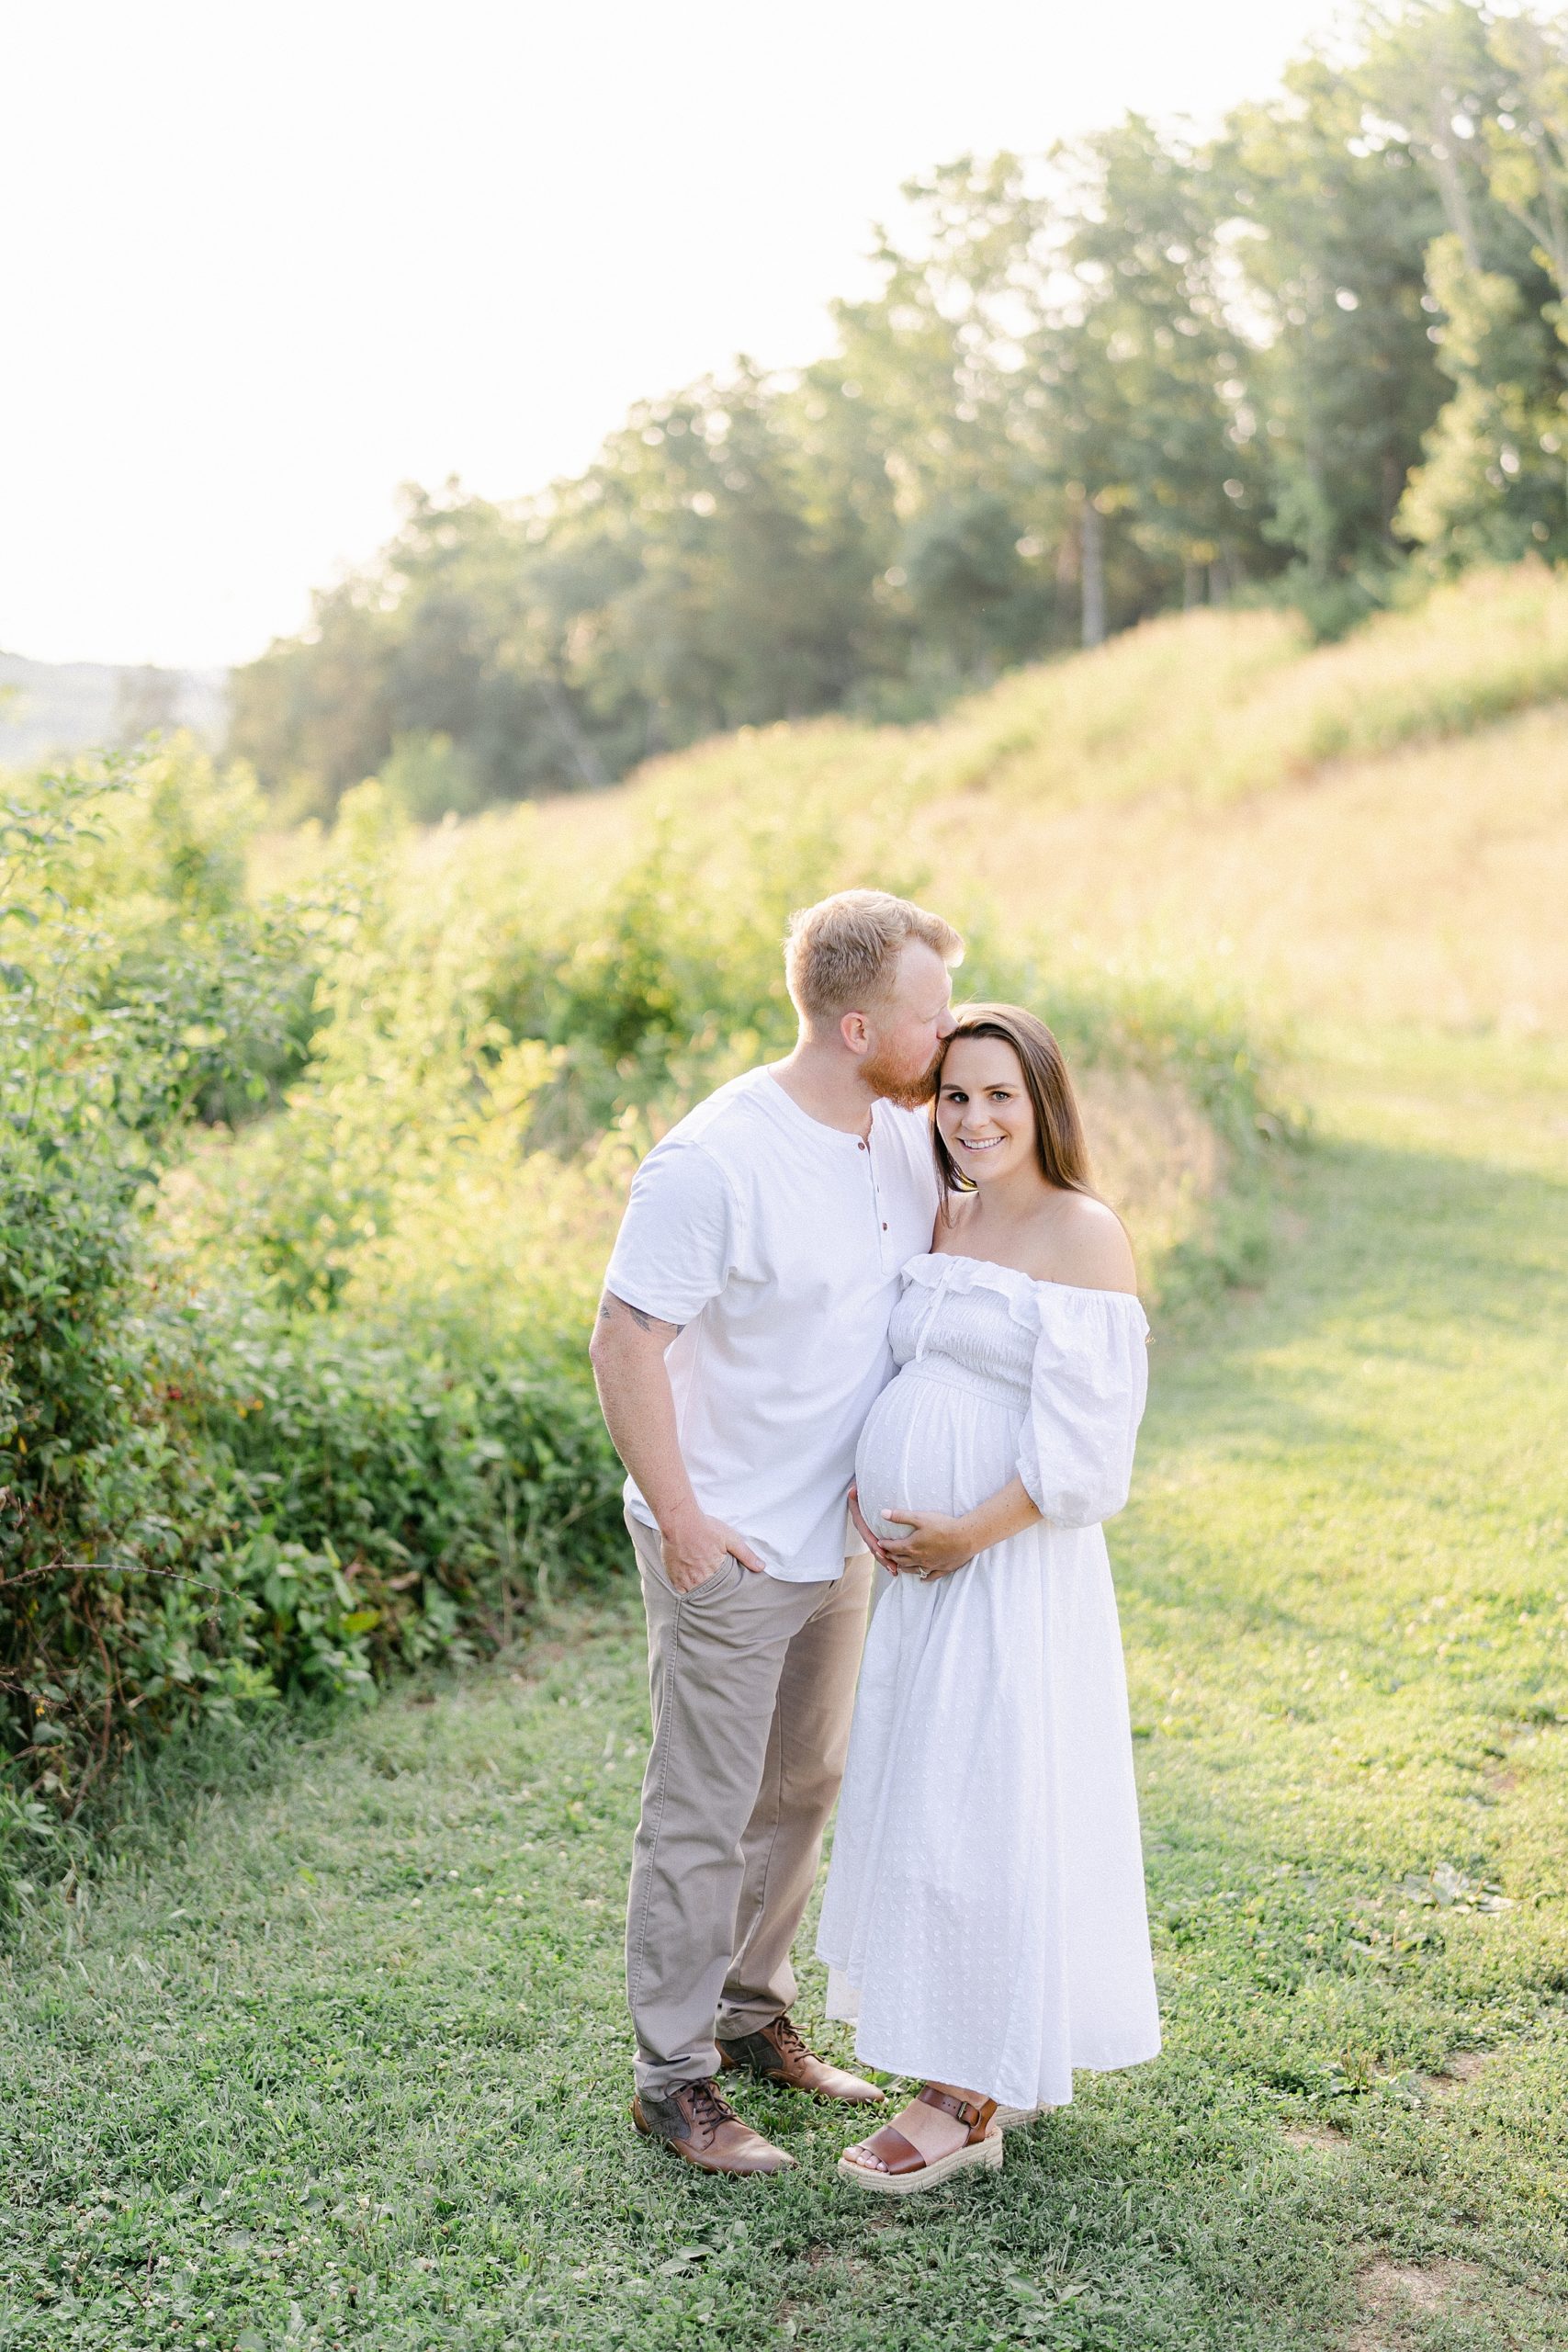 Couple in grass field during Brentwood, TN Maternity Session photographed by Grace Paul Photography